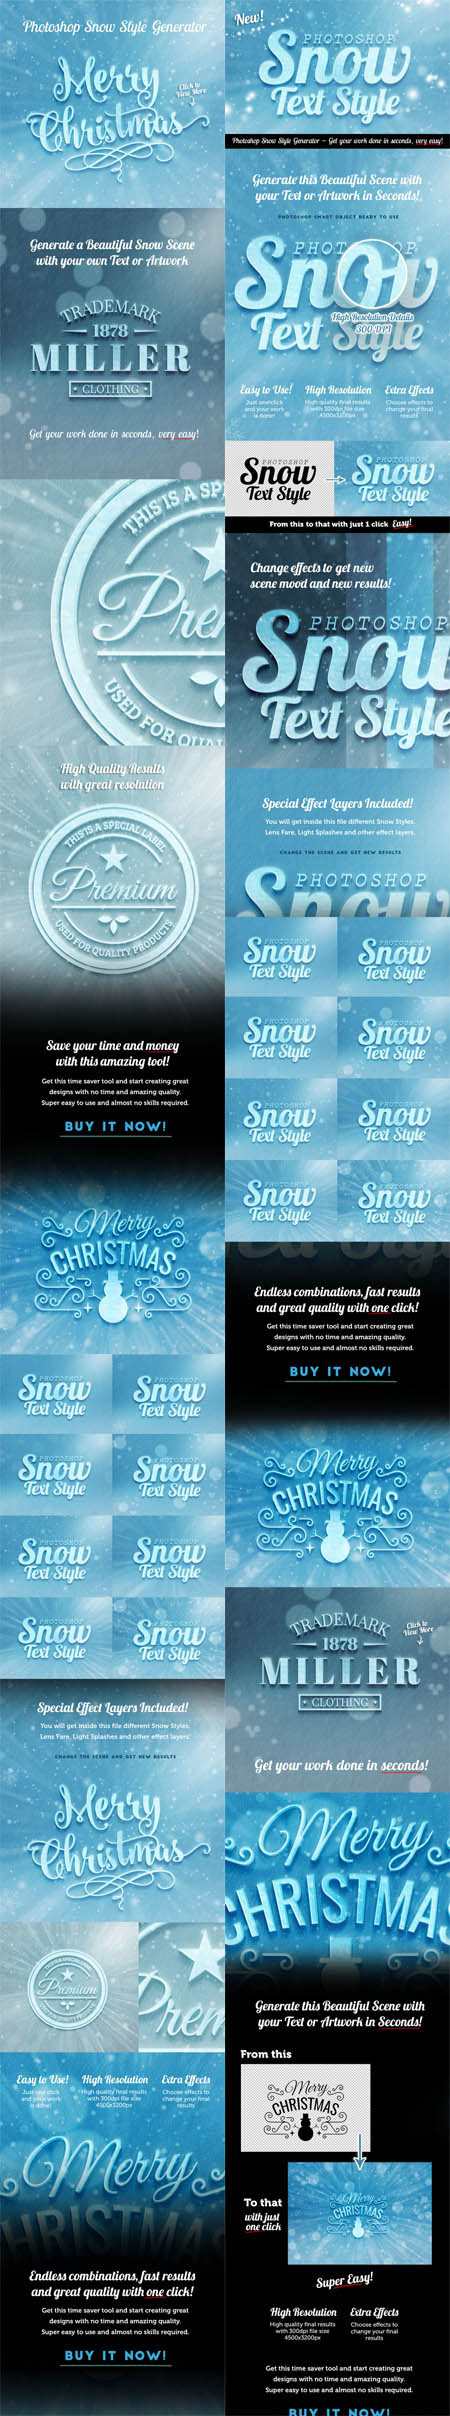 CM - Snow Text Effect Psd for Photoshop 464267